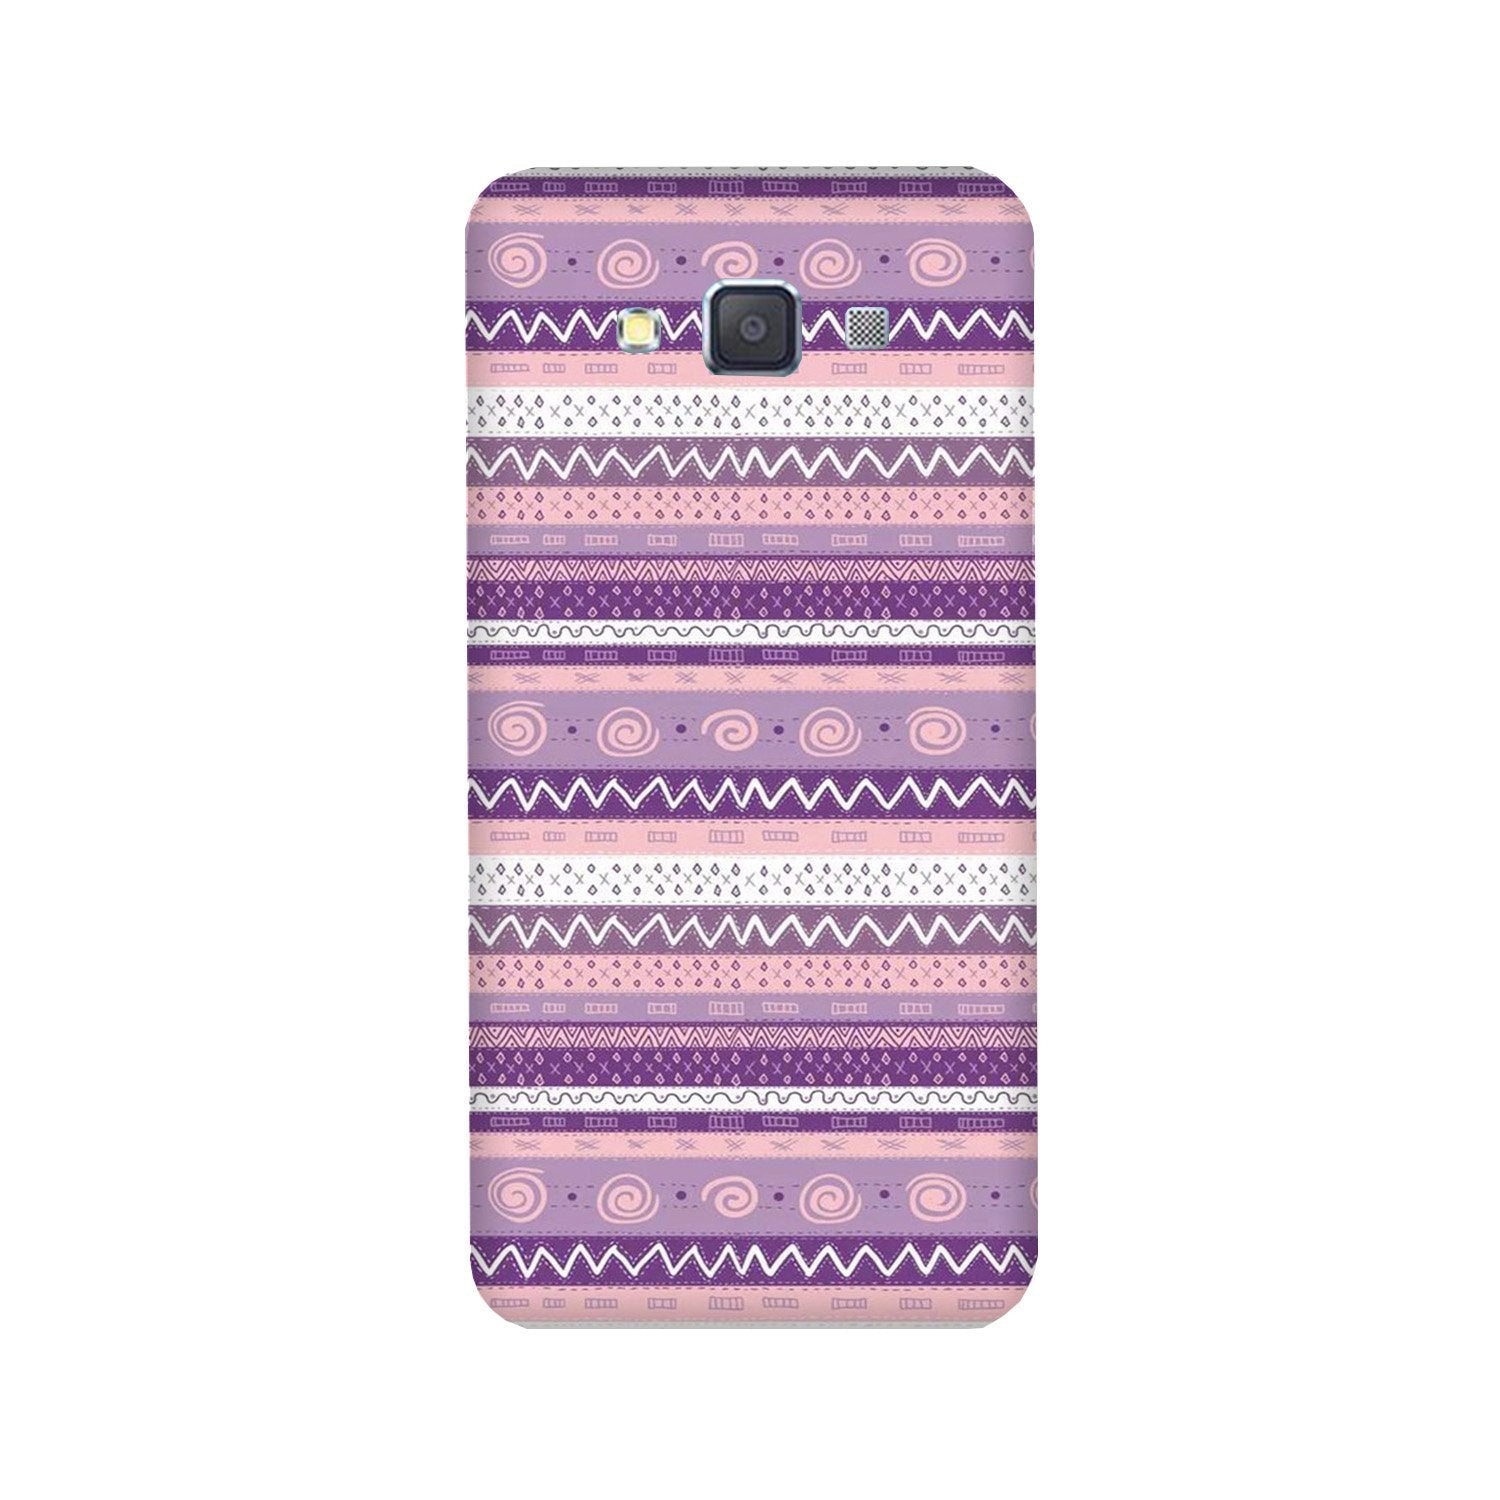 Zigzag line pattern3 Case for Galaxy ON7/ON7 Pro